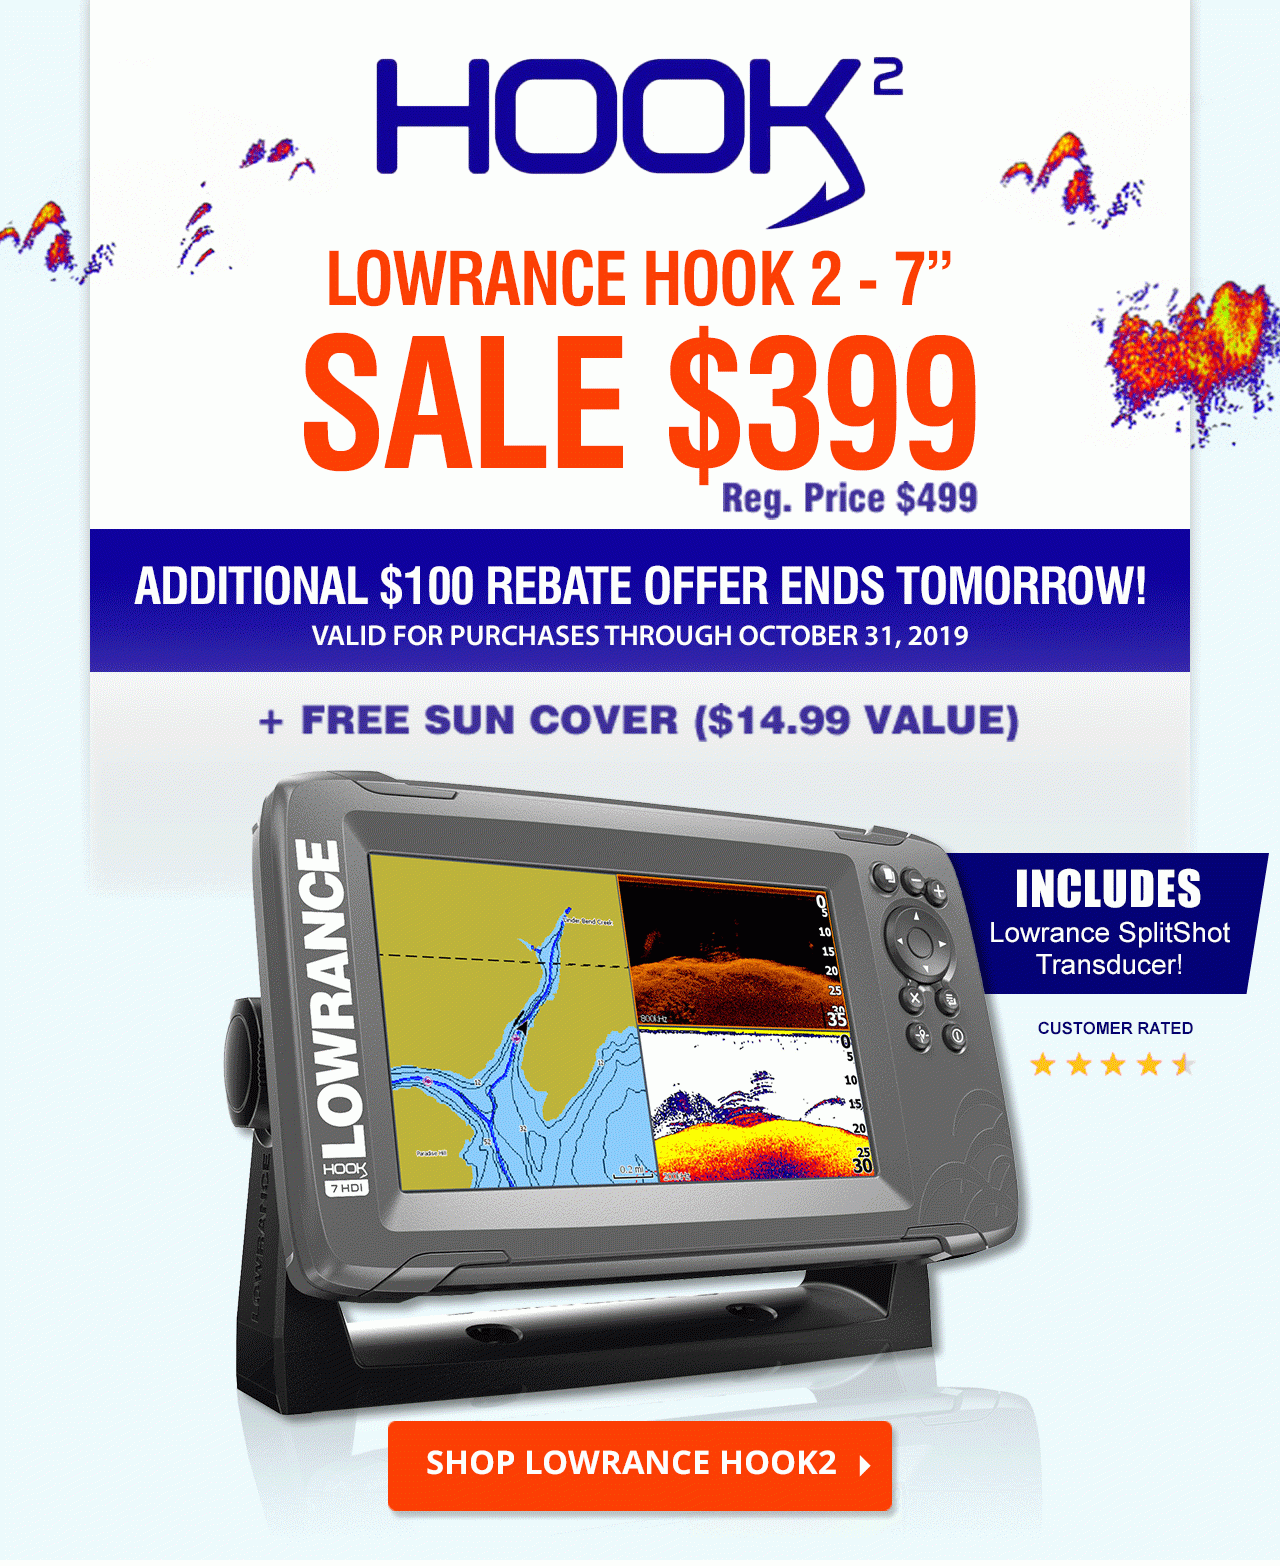 SALE: Lowrance Hook 2 7" Was: $499 NOW: $399 w/ Sun Cover